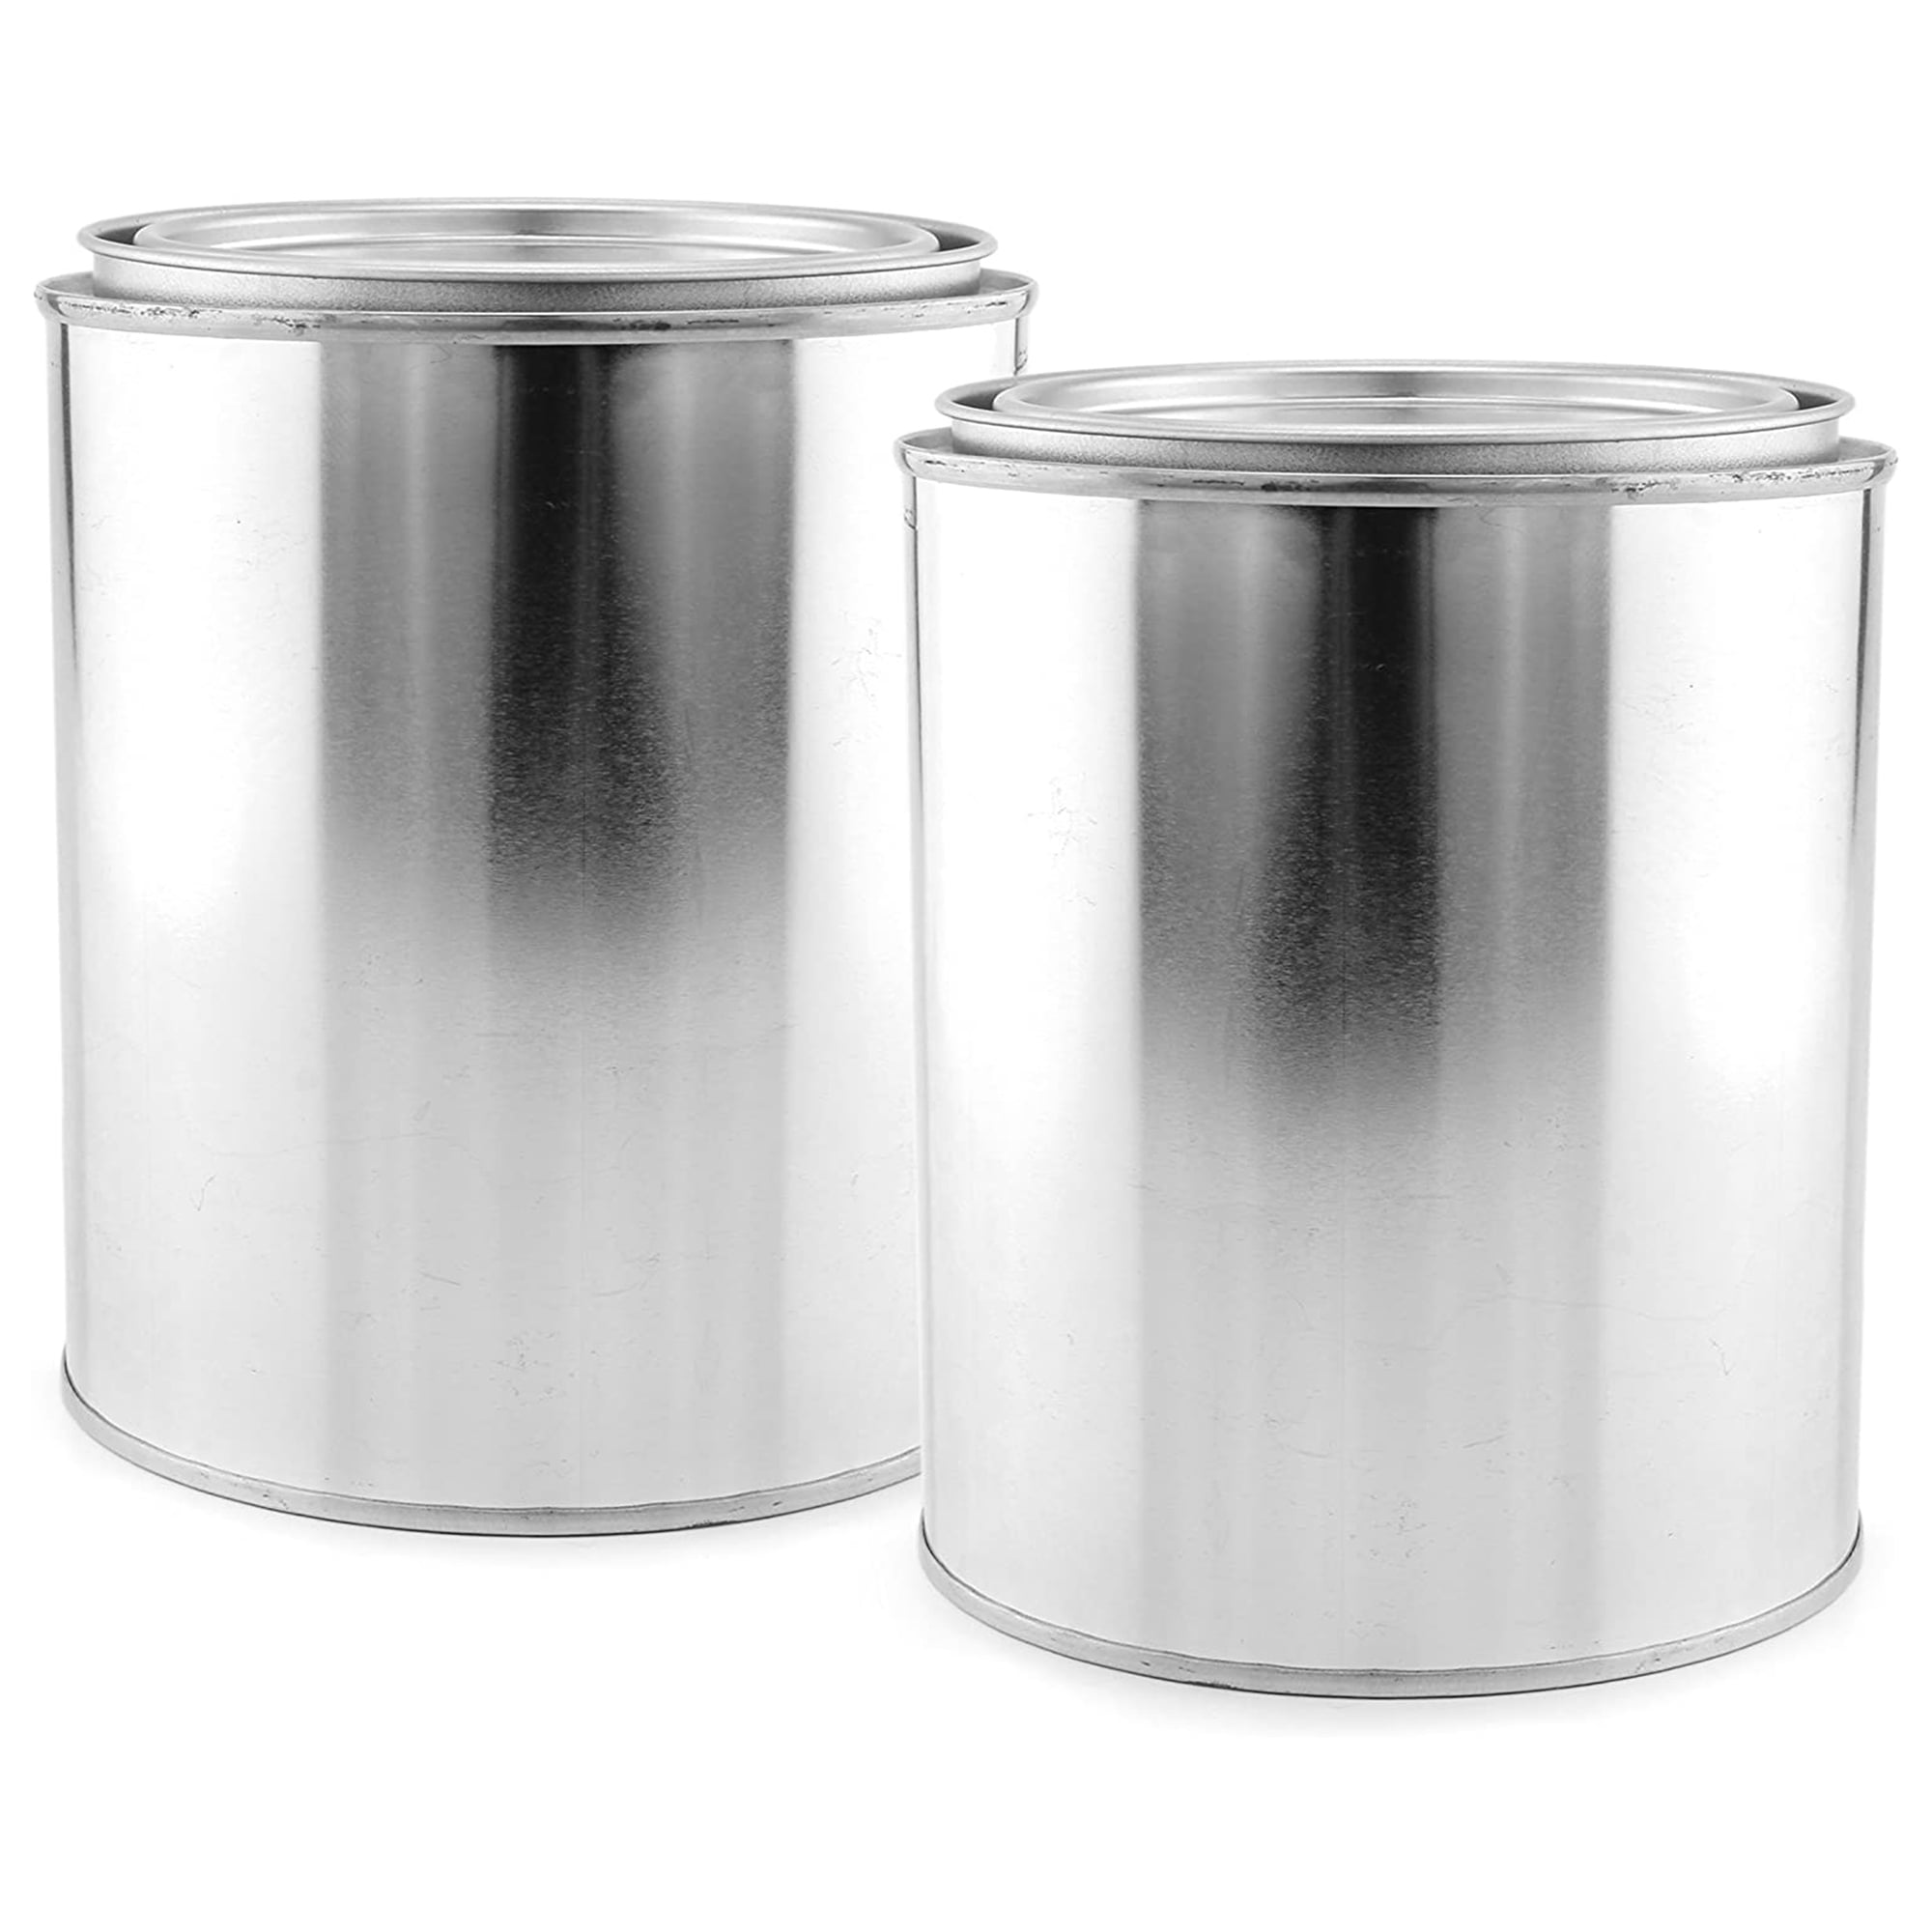 Blysk Empty Metal Paint Cans with Lids 1/4 Pint 2